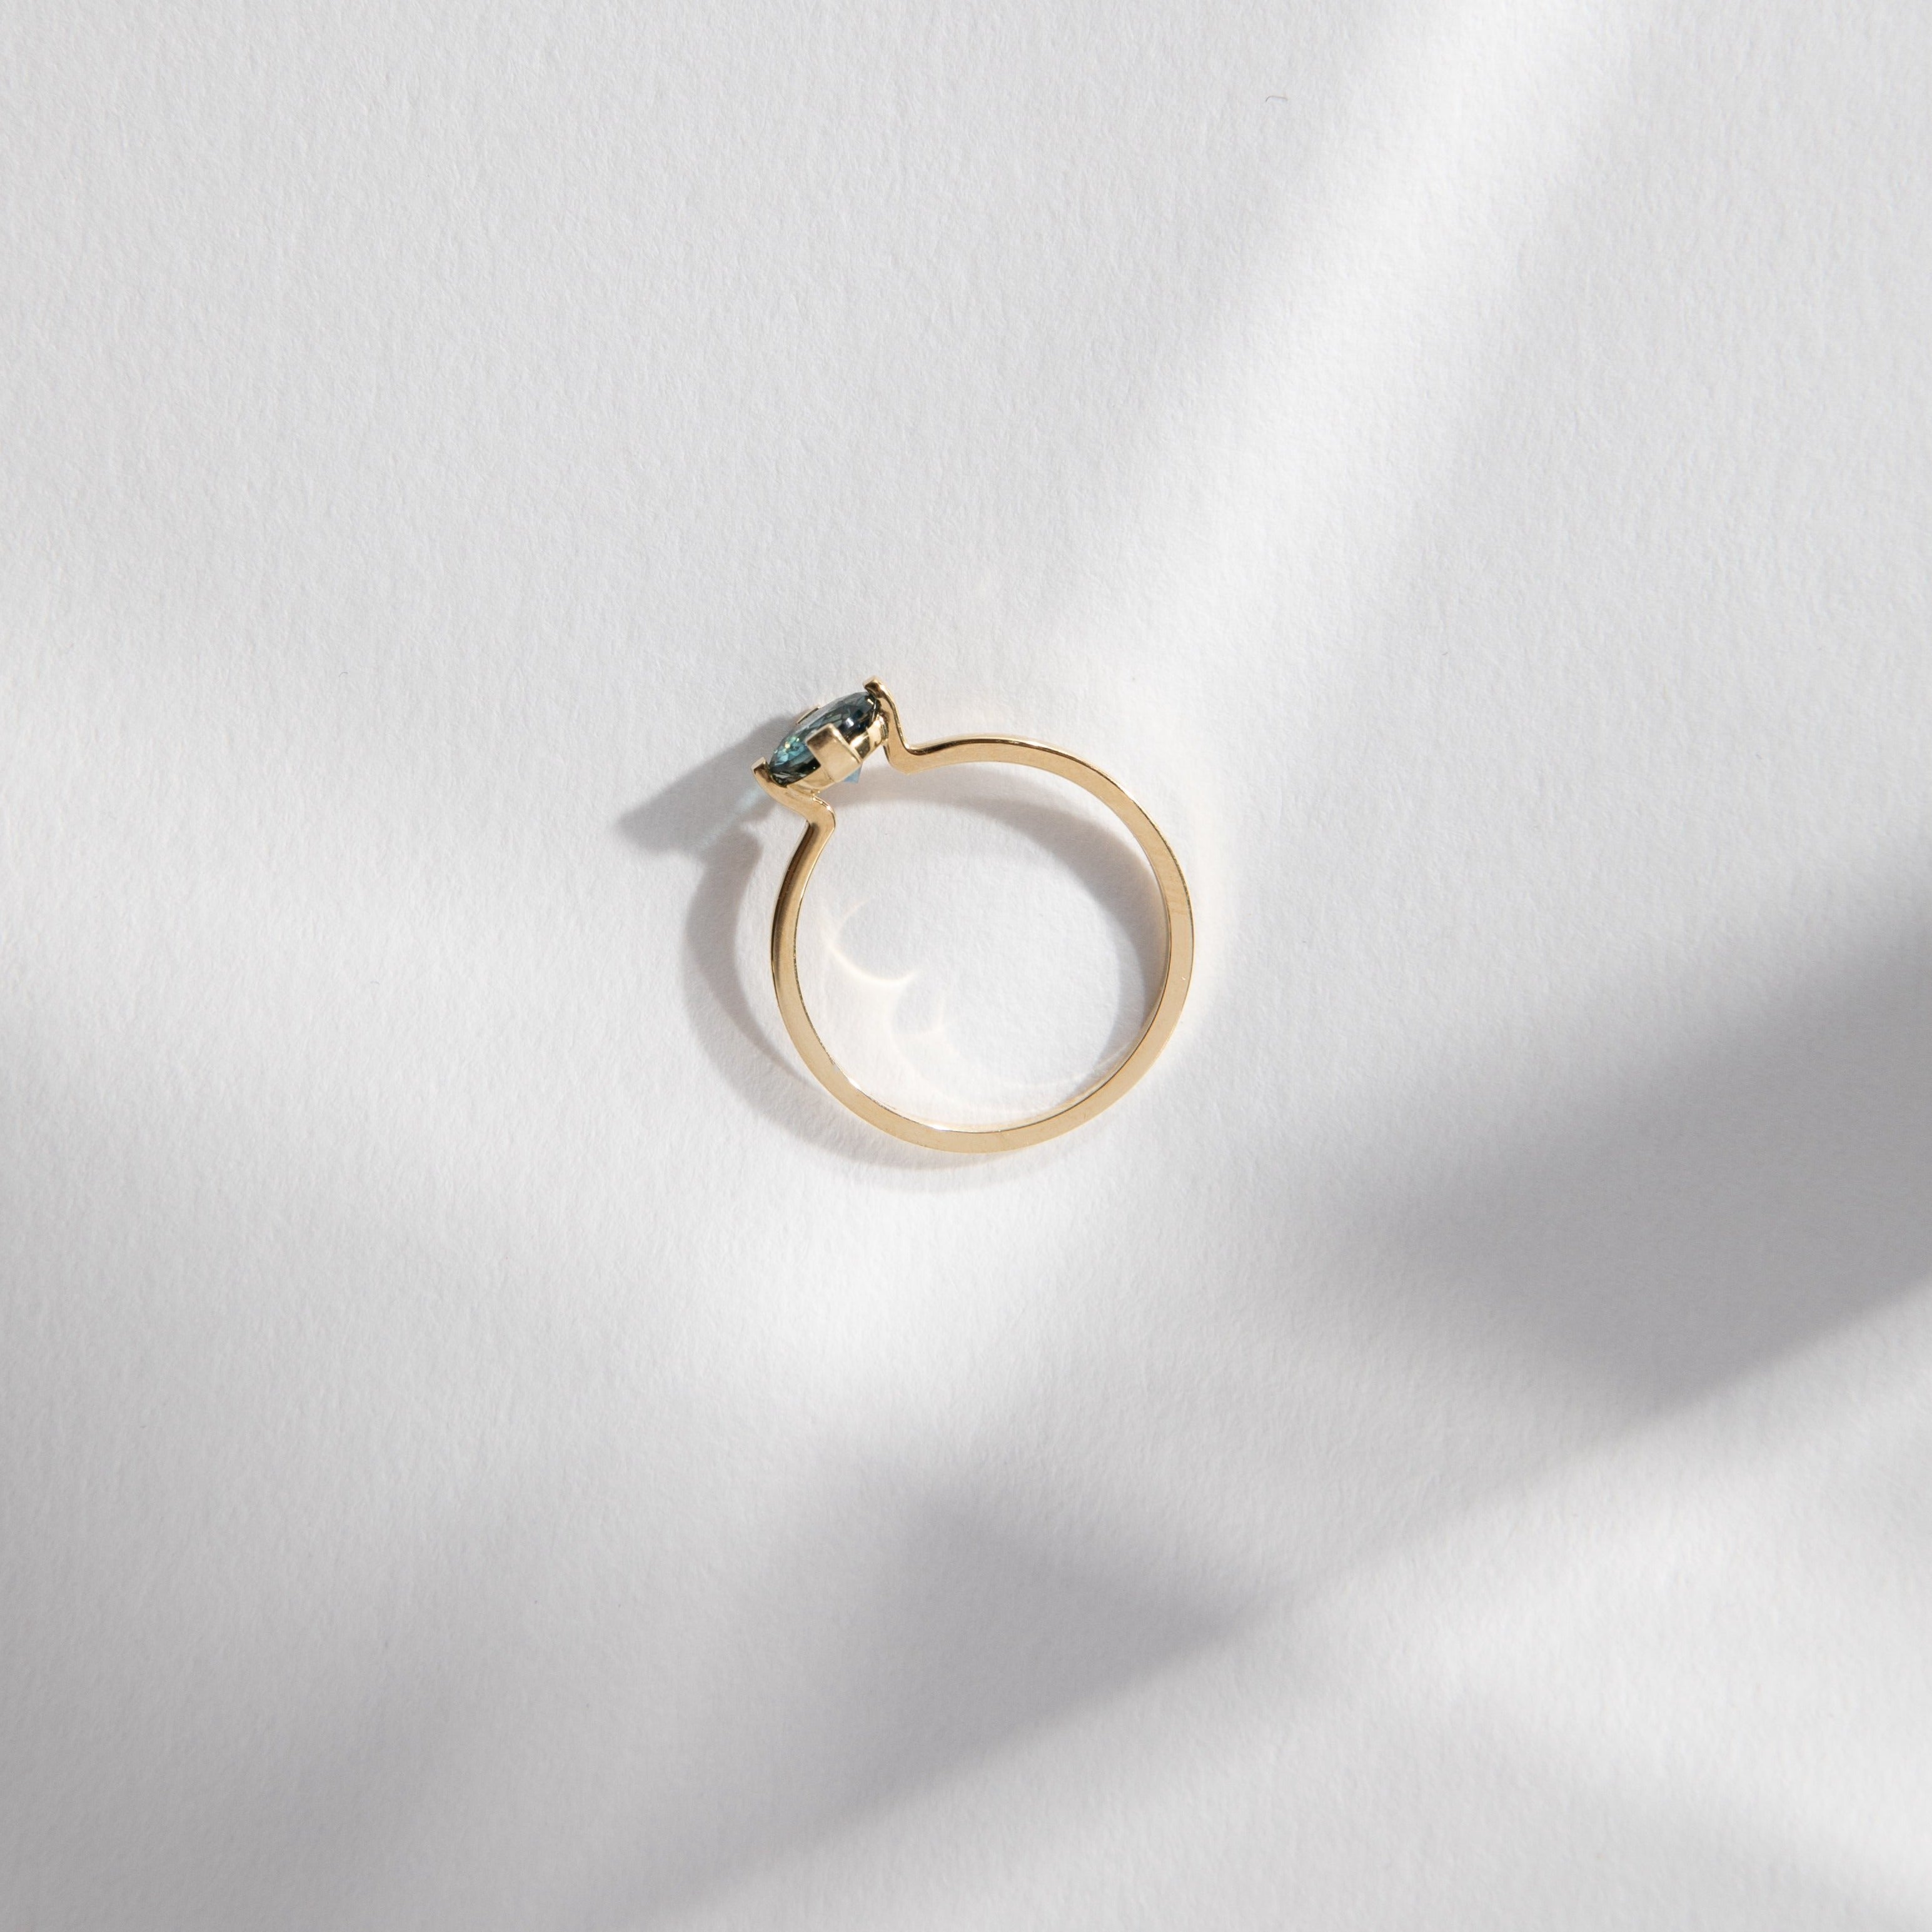 Ema Simple Ring in 14k Gold set with a 0.8ct round brilliant cut medium denim color sapphire By SHW Fine Jewelry NYC